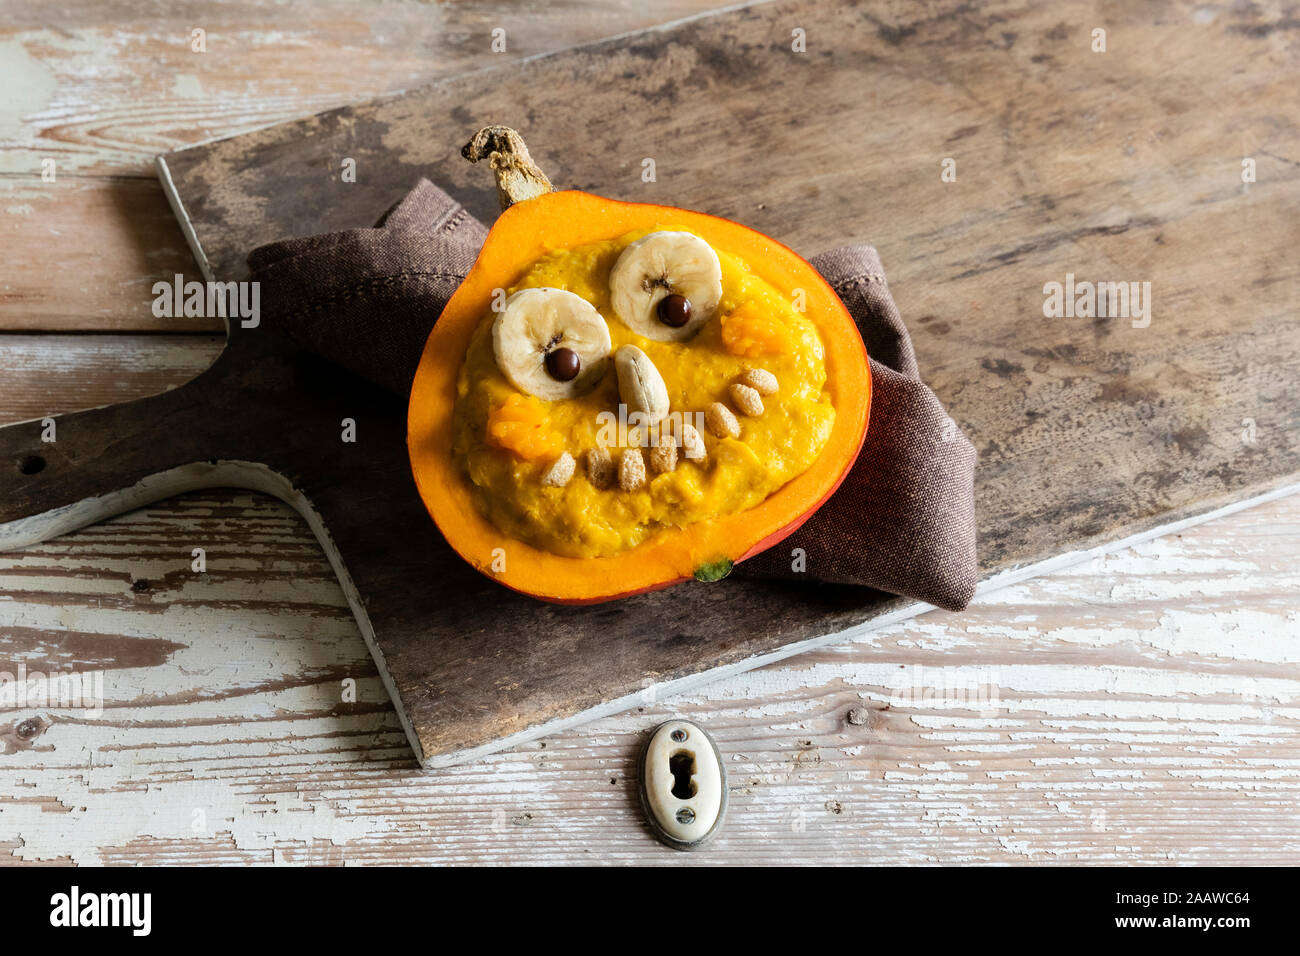 High angle view of pumpkin with anthropomorphic face on tray during Halloween Stock Photo